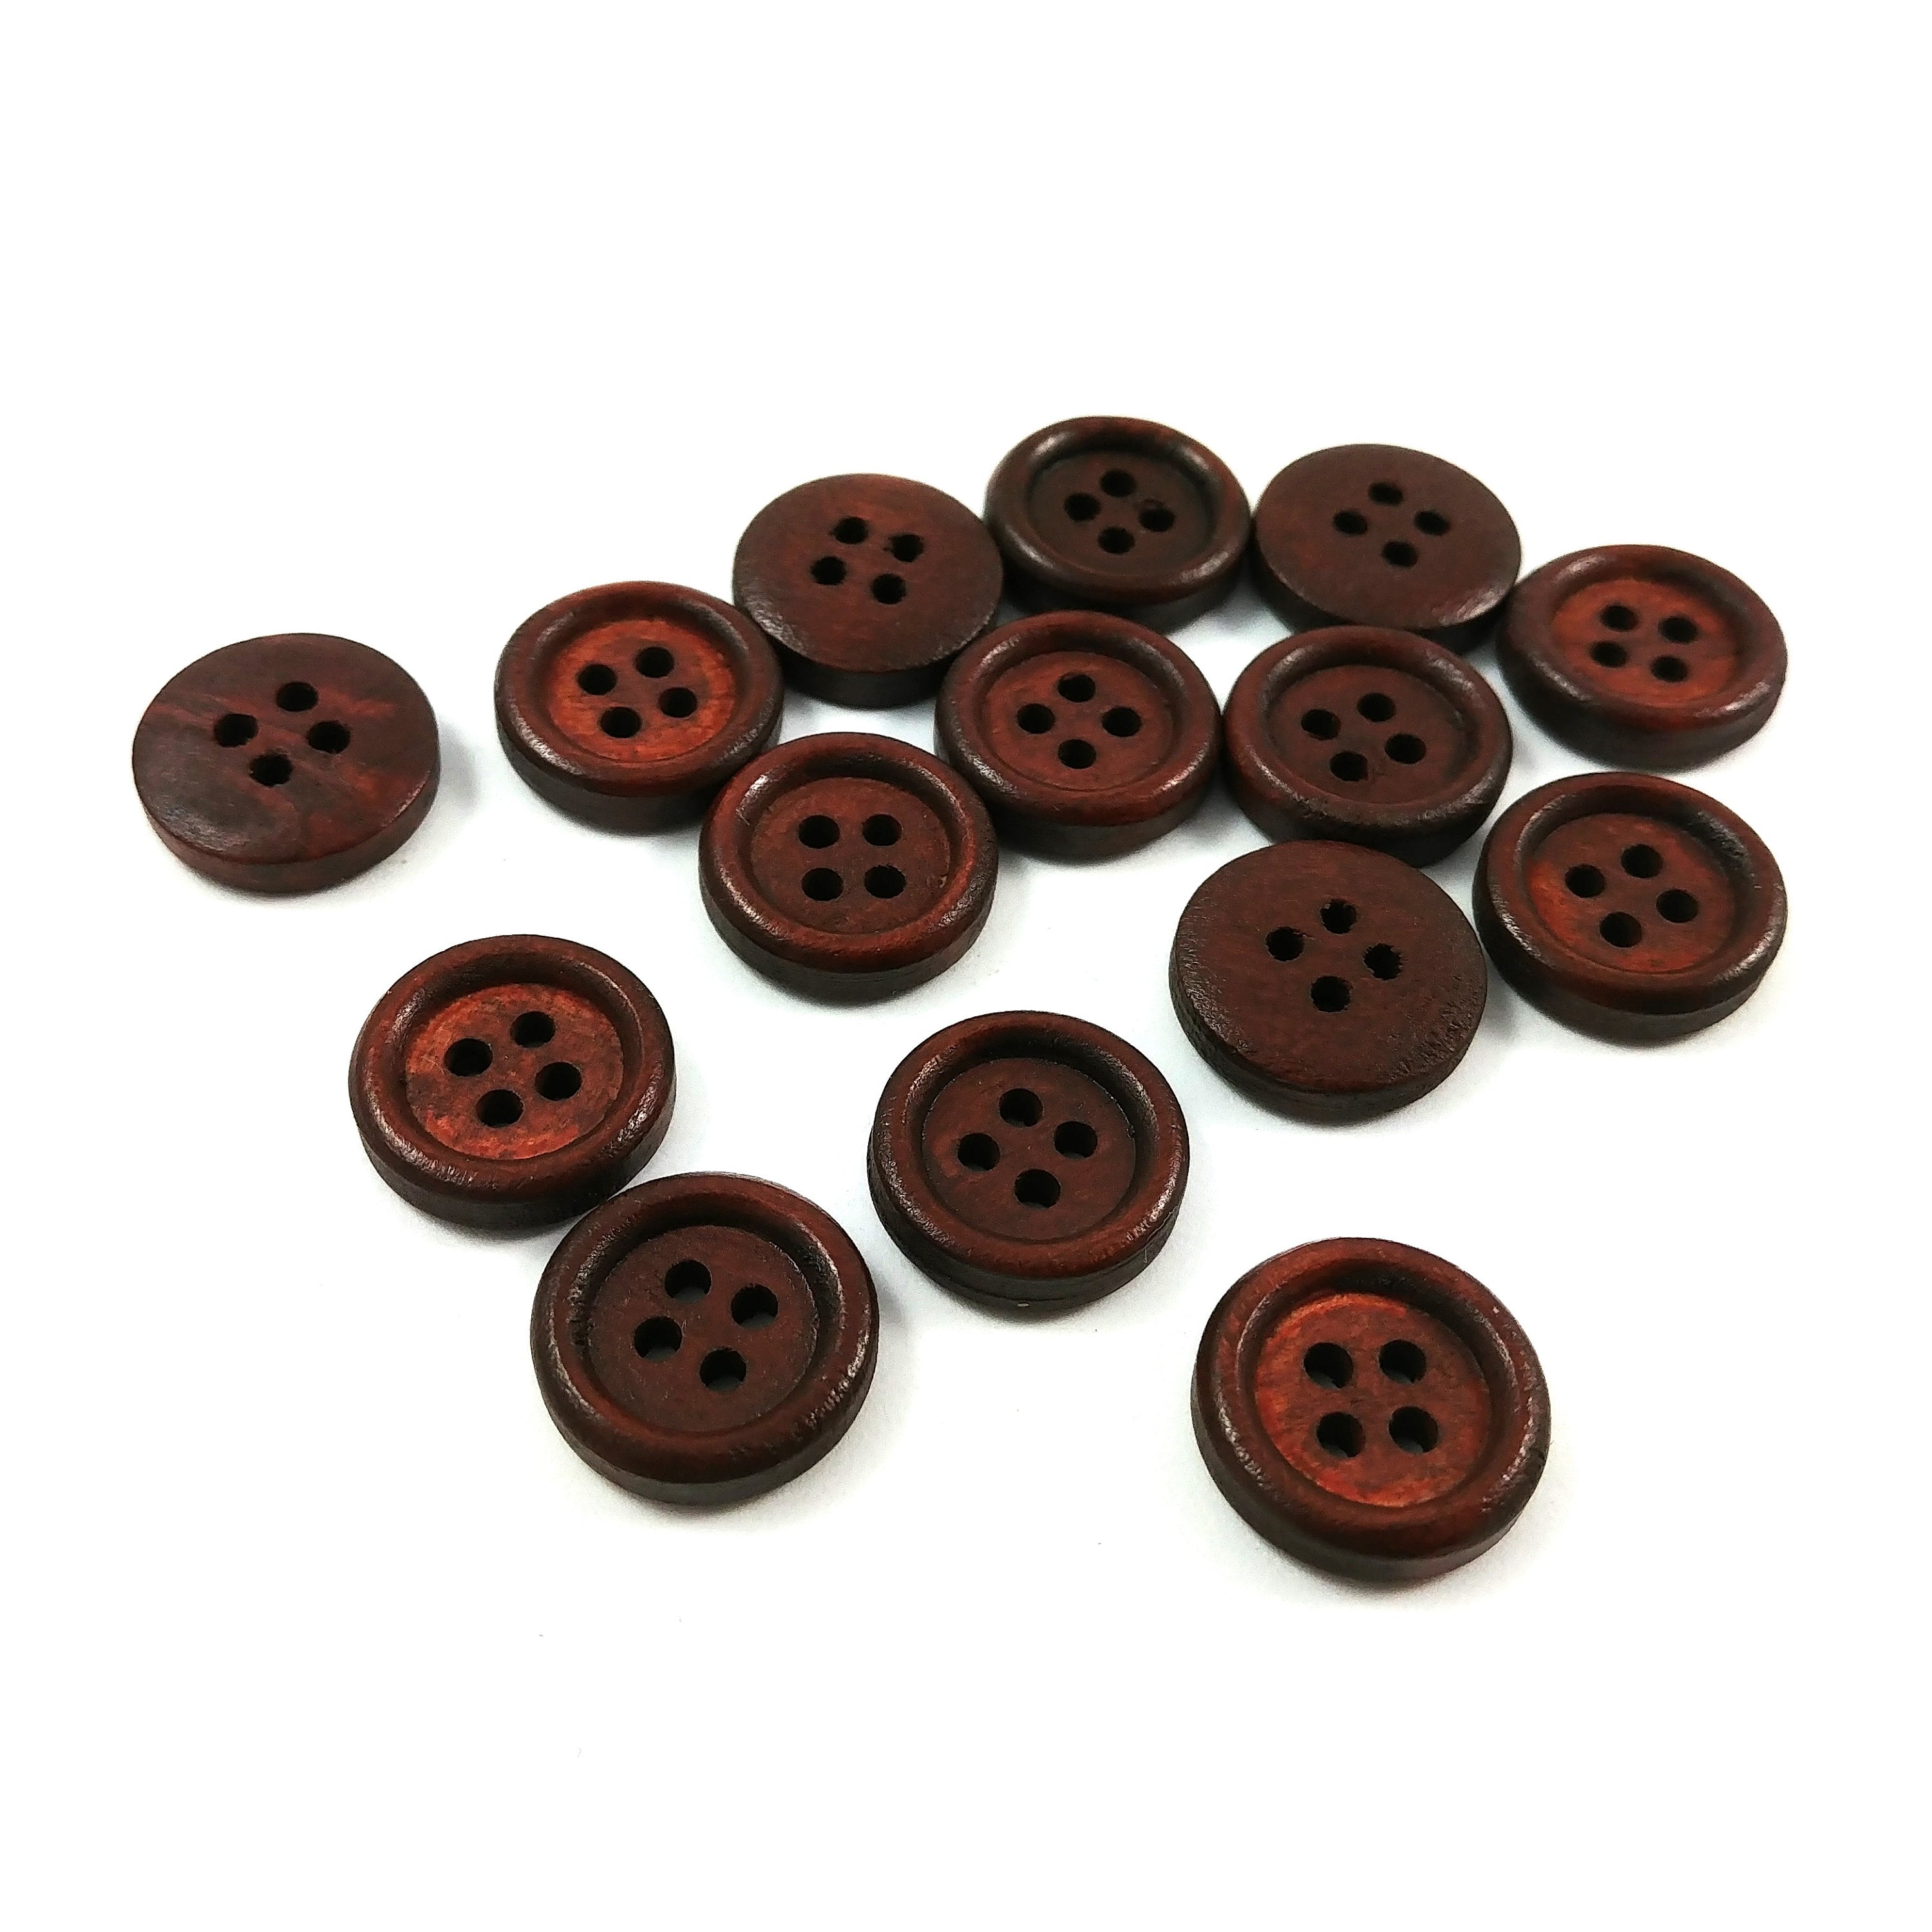 Wooden buttons - Reddish brown 4 Holes Wood Sewing Buttons 15mm - set of 15 or 60